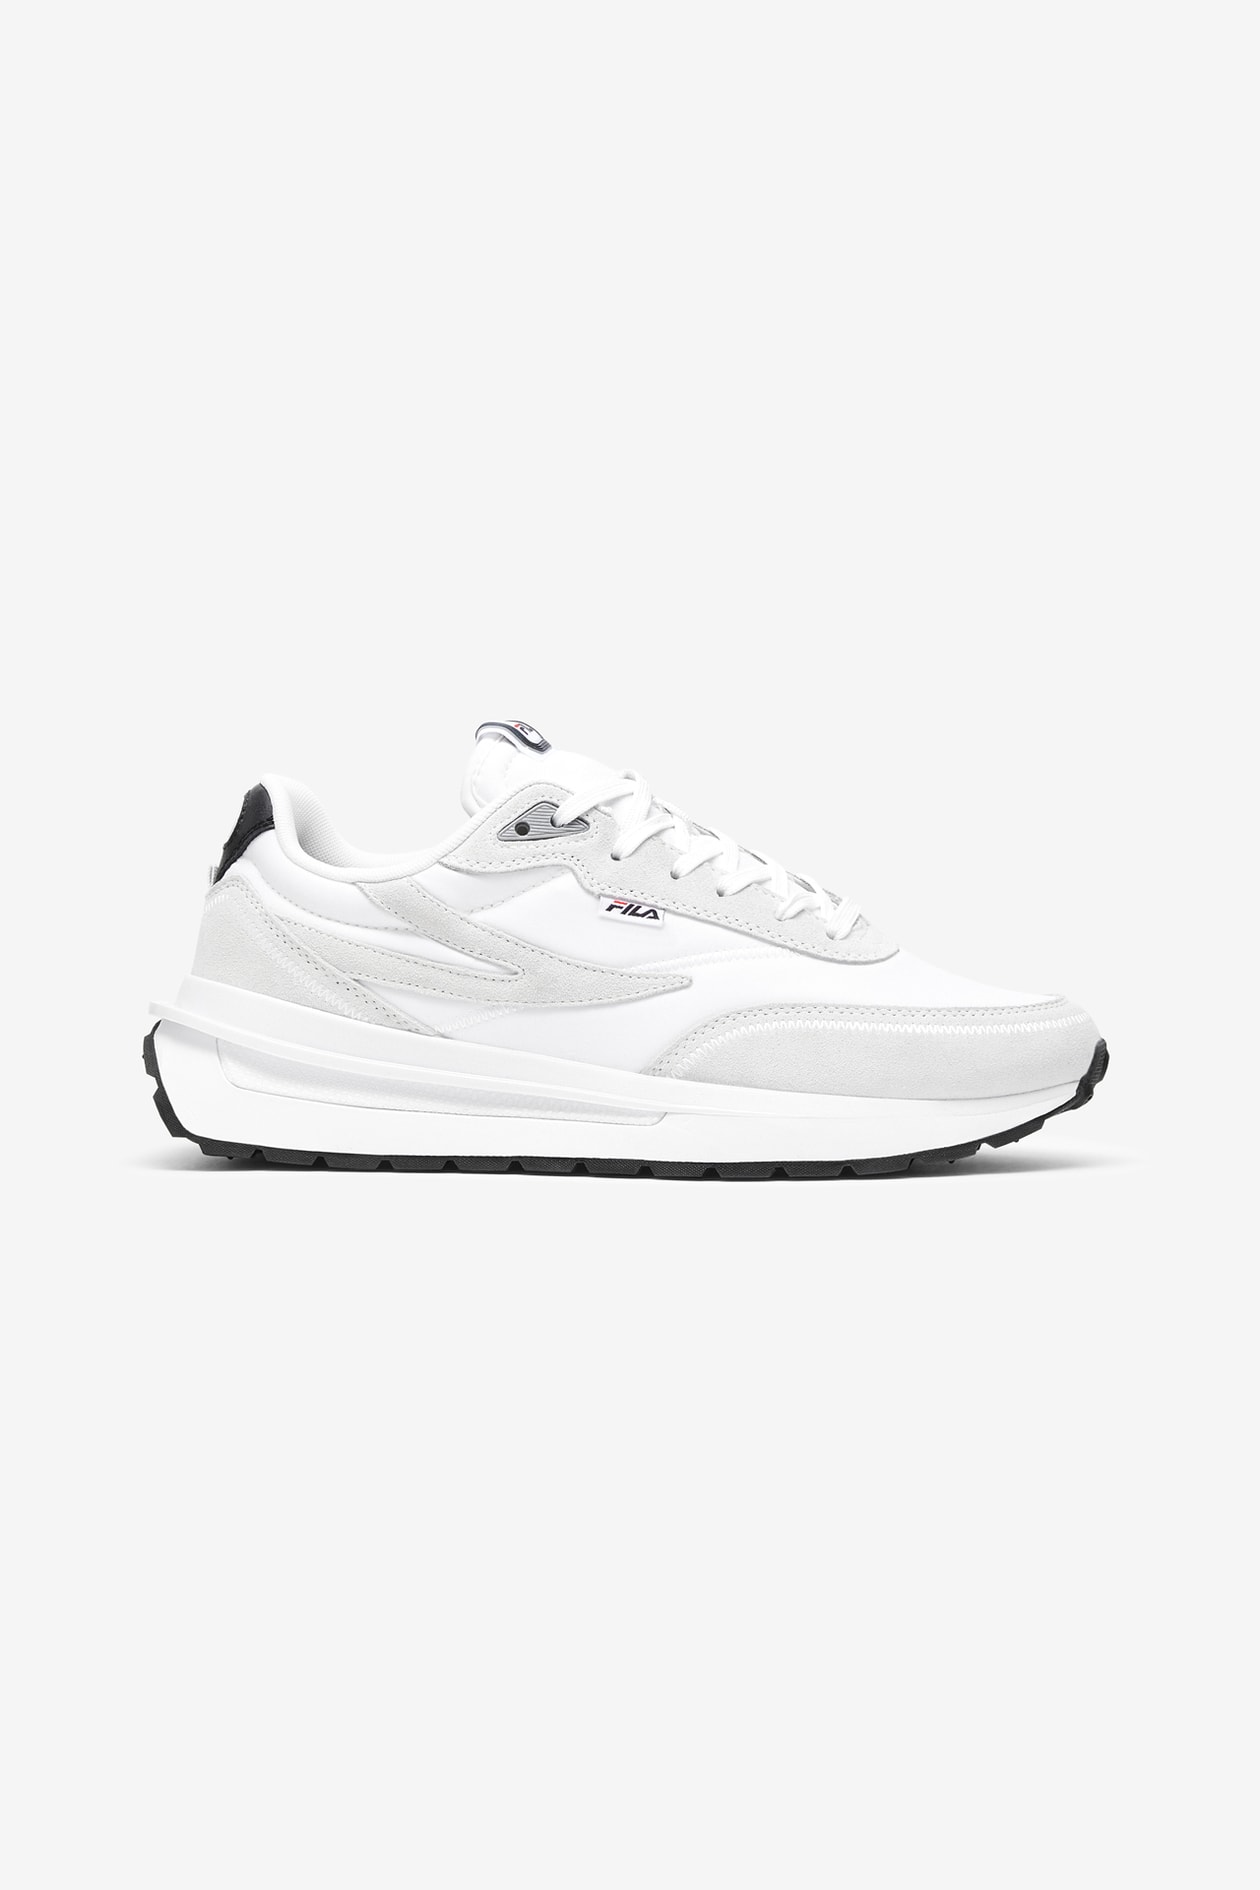 black, white, metallic and silver colorways both men and women “Whisper White” colorway, leather upper overlays, engineered knitted tongue and lining flexibility and easy slip-on access neoprene textile backing rubber molded heel tongue branding micro-grain nylon underlays